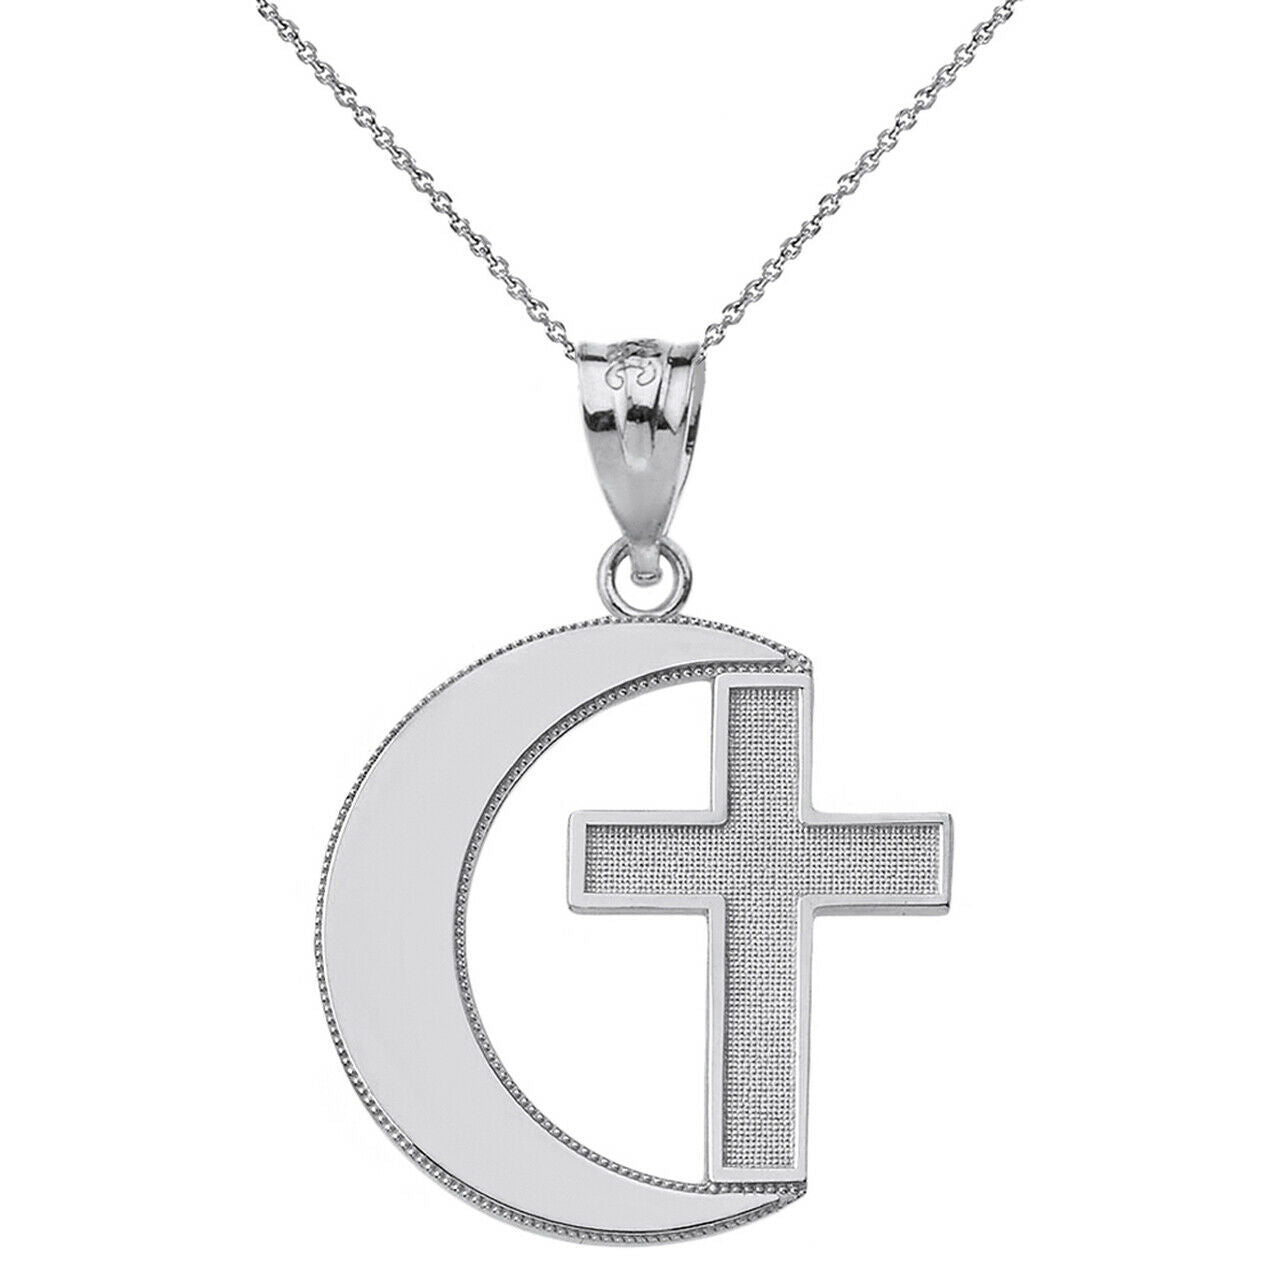 Polished .925 Sterling Silver Religious Crescent Moon and Cross Pendant Necklace